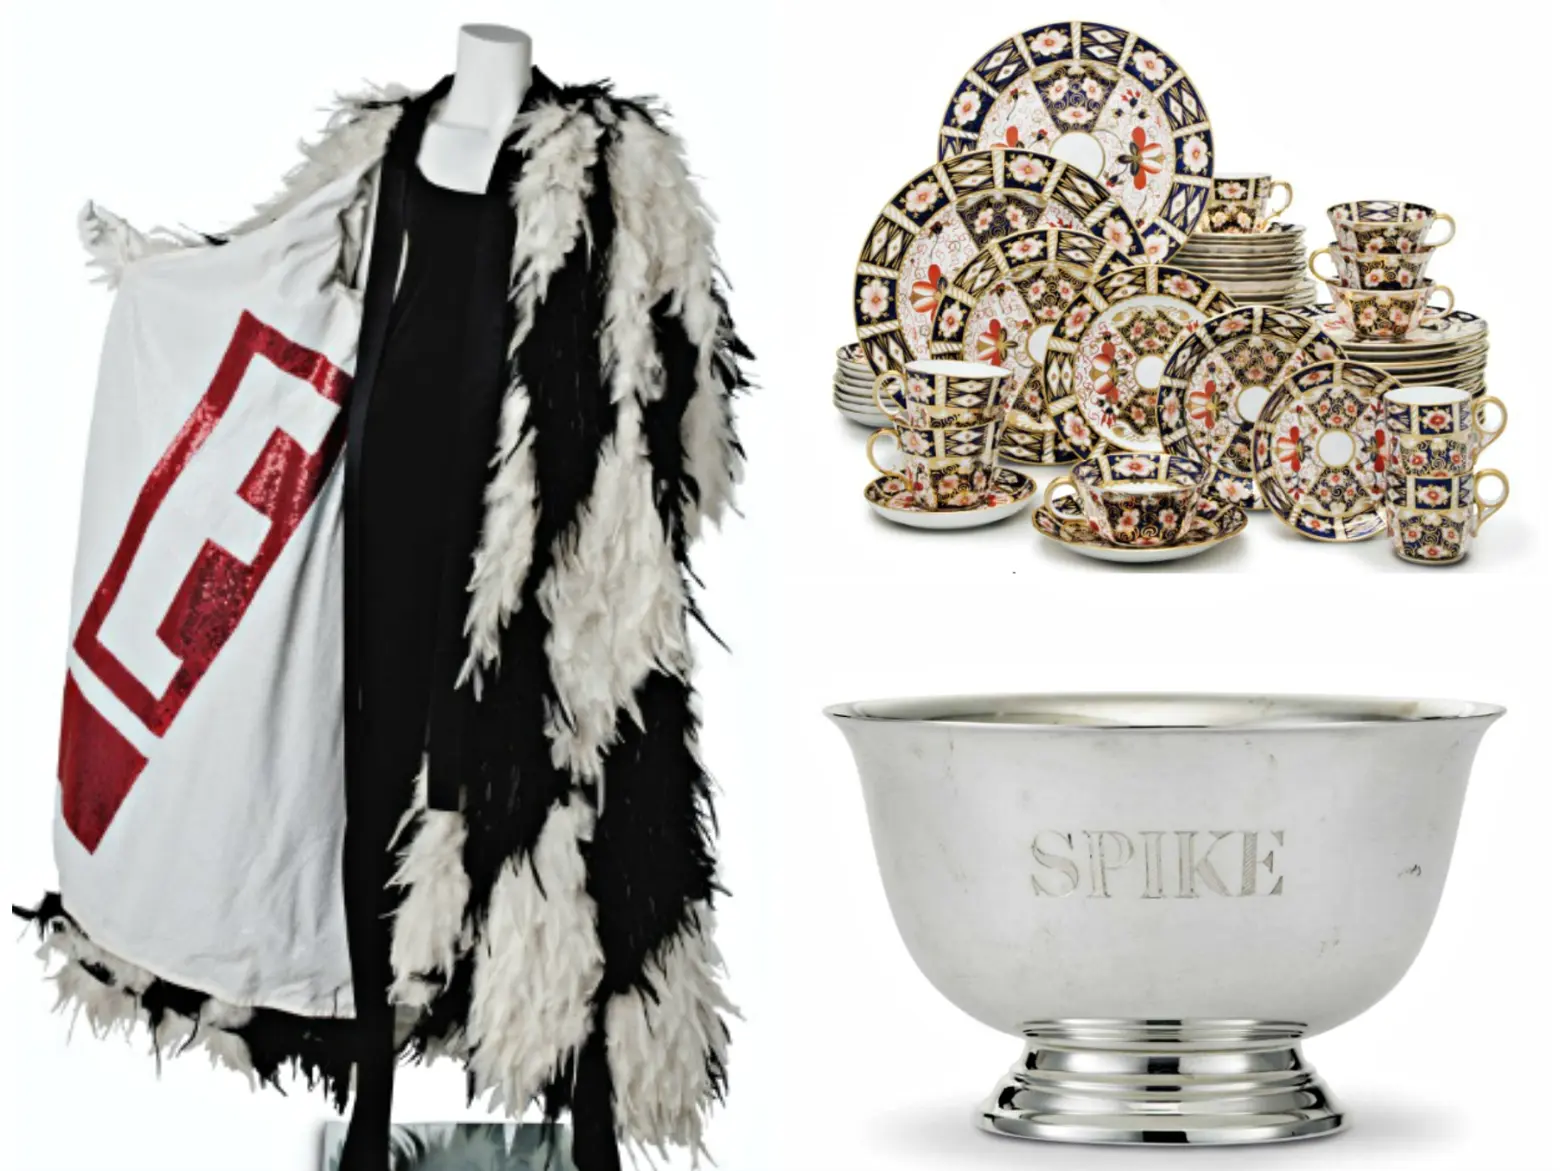 Browse the Catalog of Joan Rivers’ Prized Possessions Headed for Auction Next Month